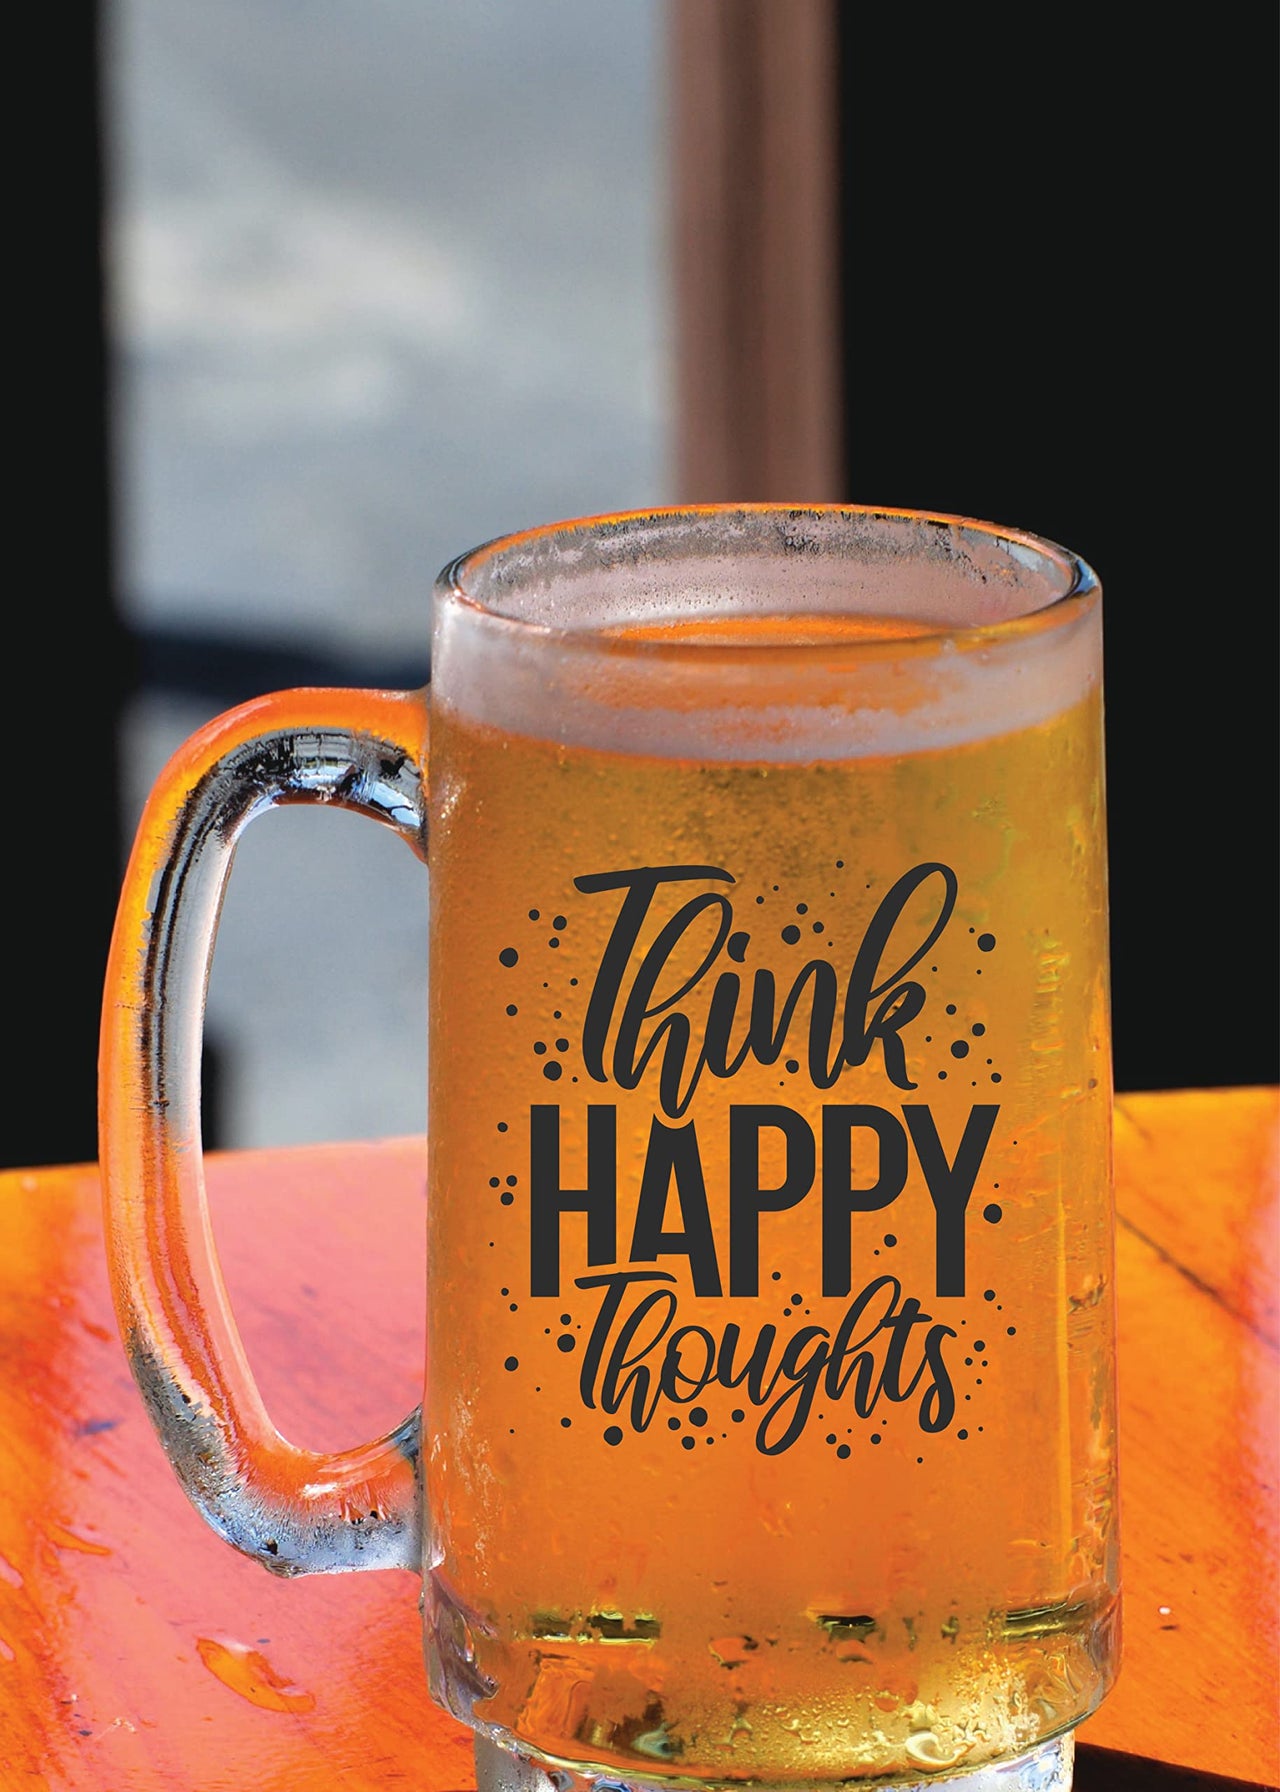 Think Happy Thoughts - Beer Mug - 1 Piece, Clear, 500 ml - Transparent Glass Beer Mug - Printed Beer Mug with Handle Gift for Men, Dad